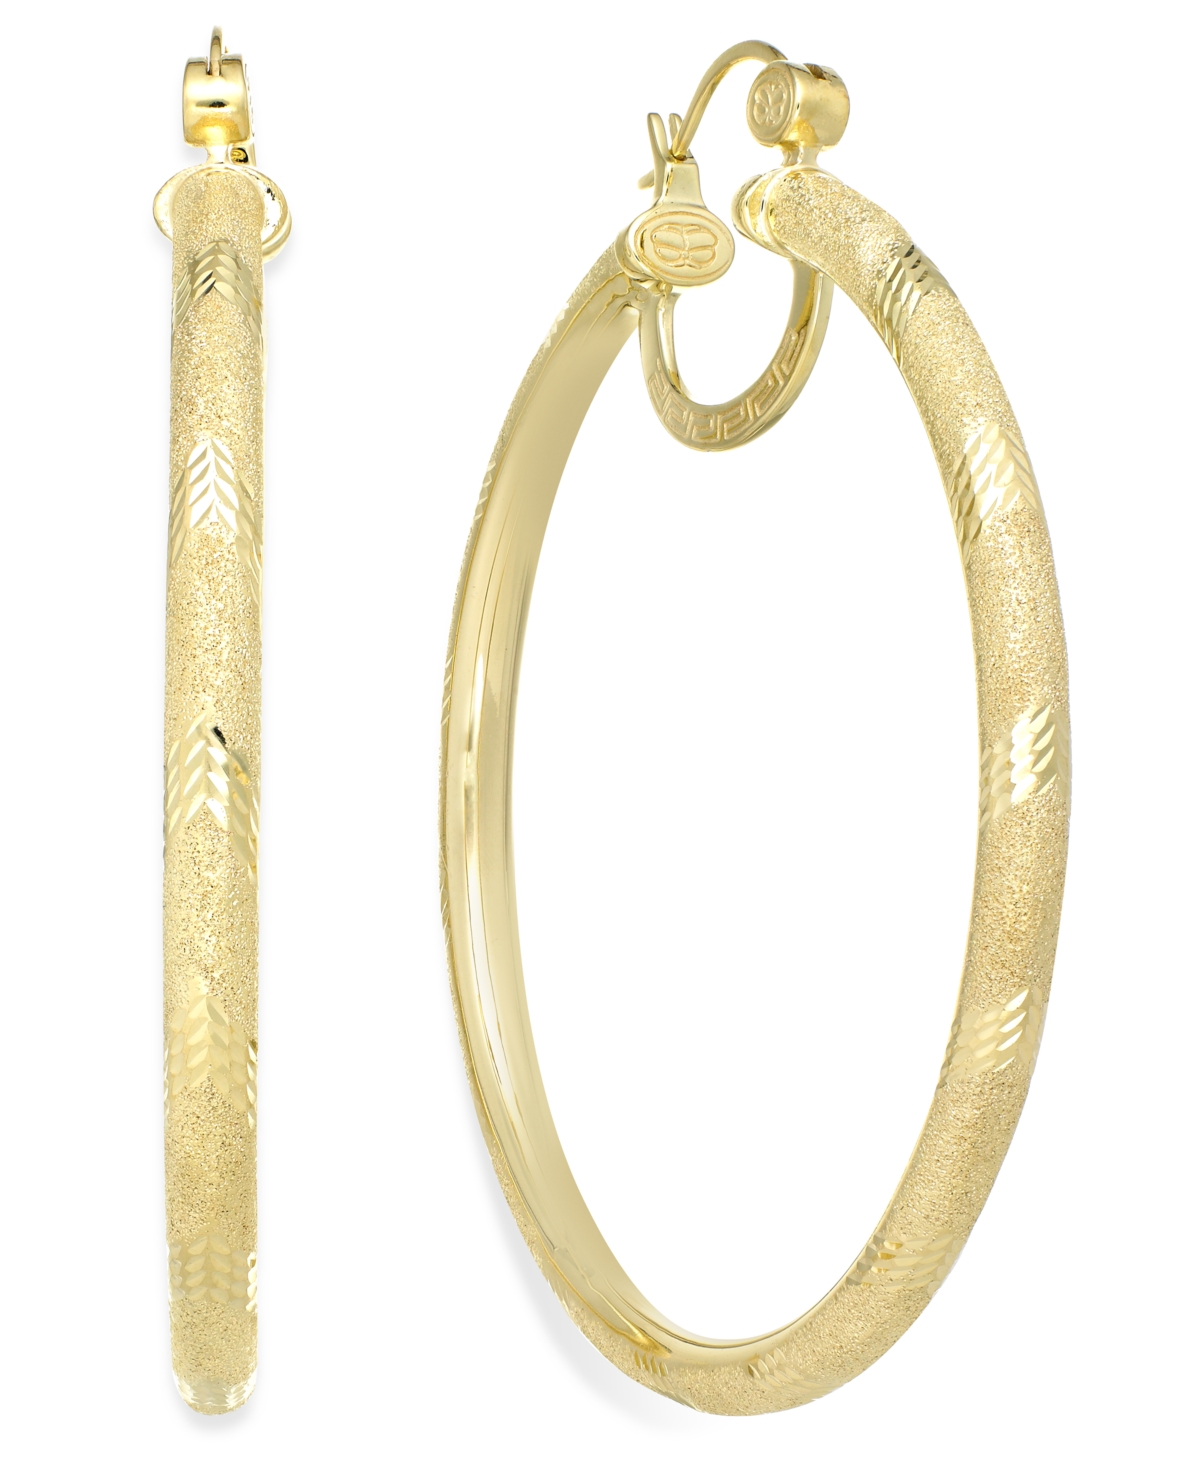 18K Gold over Sterling Silver Earrings, Laser and Diamond-Cut Extra Large Hoop Earrings (Also in Platinum Over Sterling Silver) - Plat